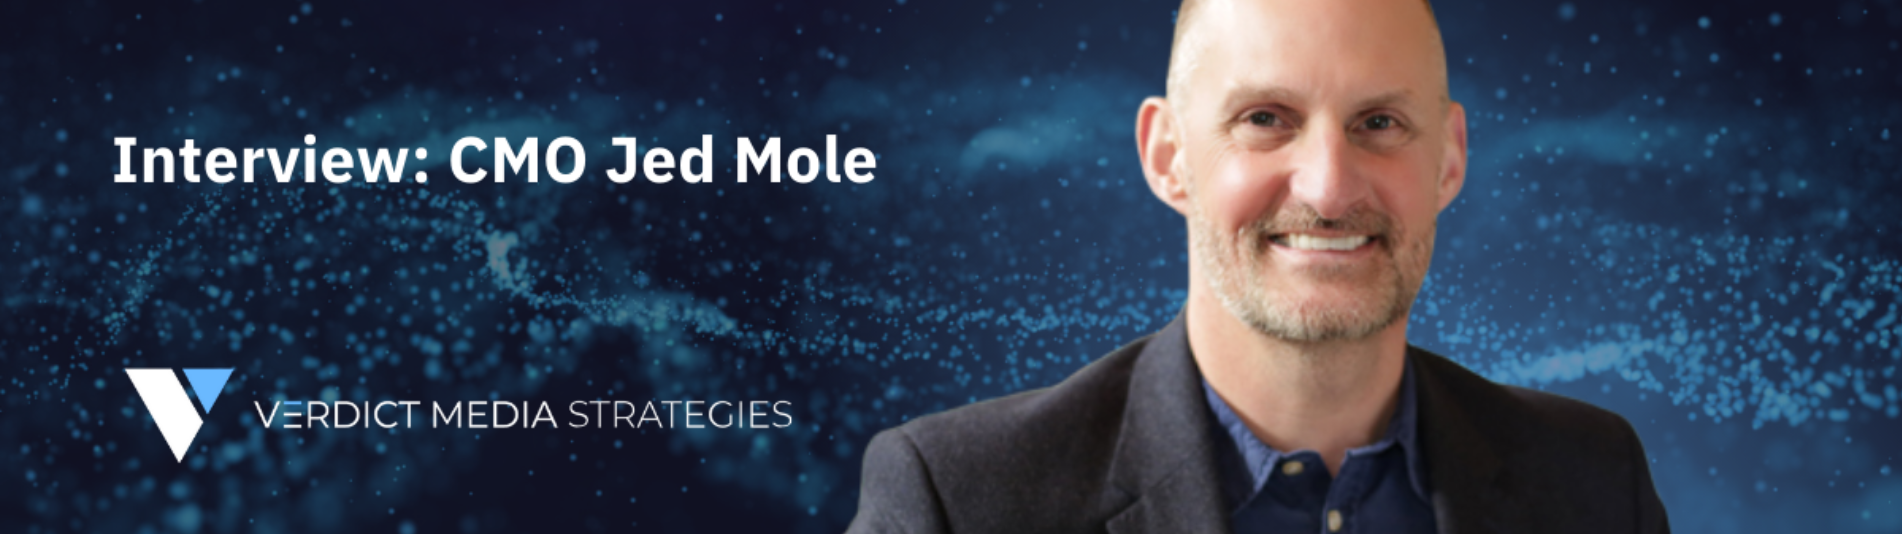 An Interview with CMO Jed Mole